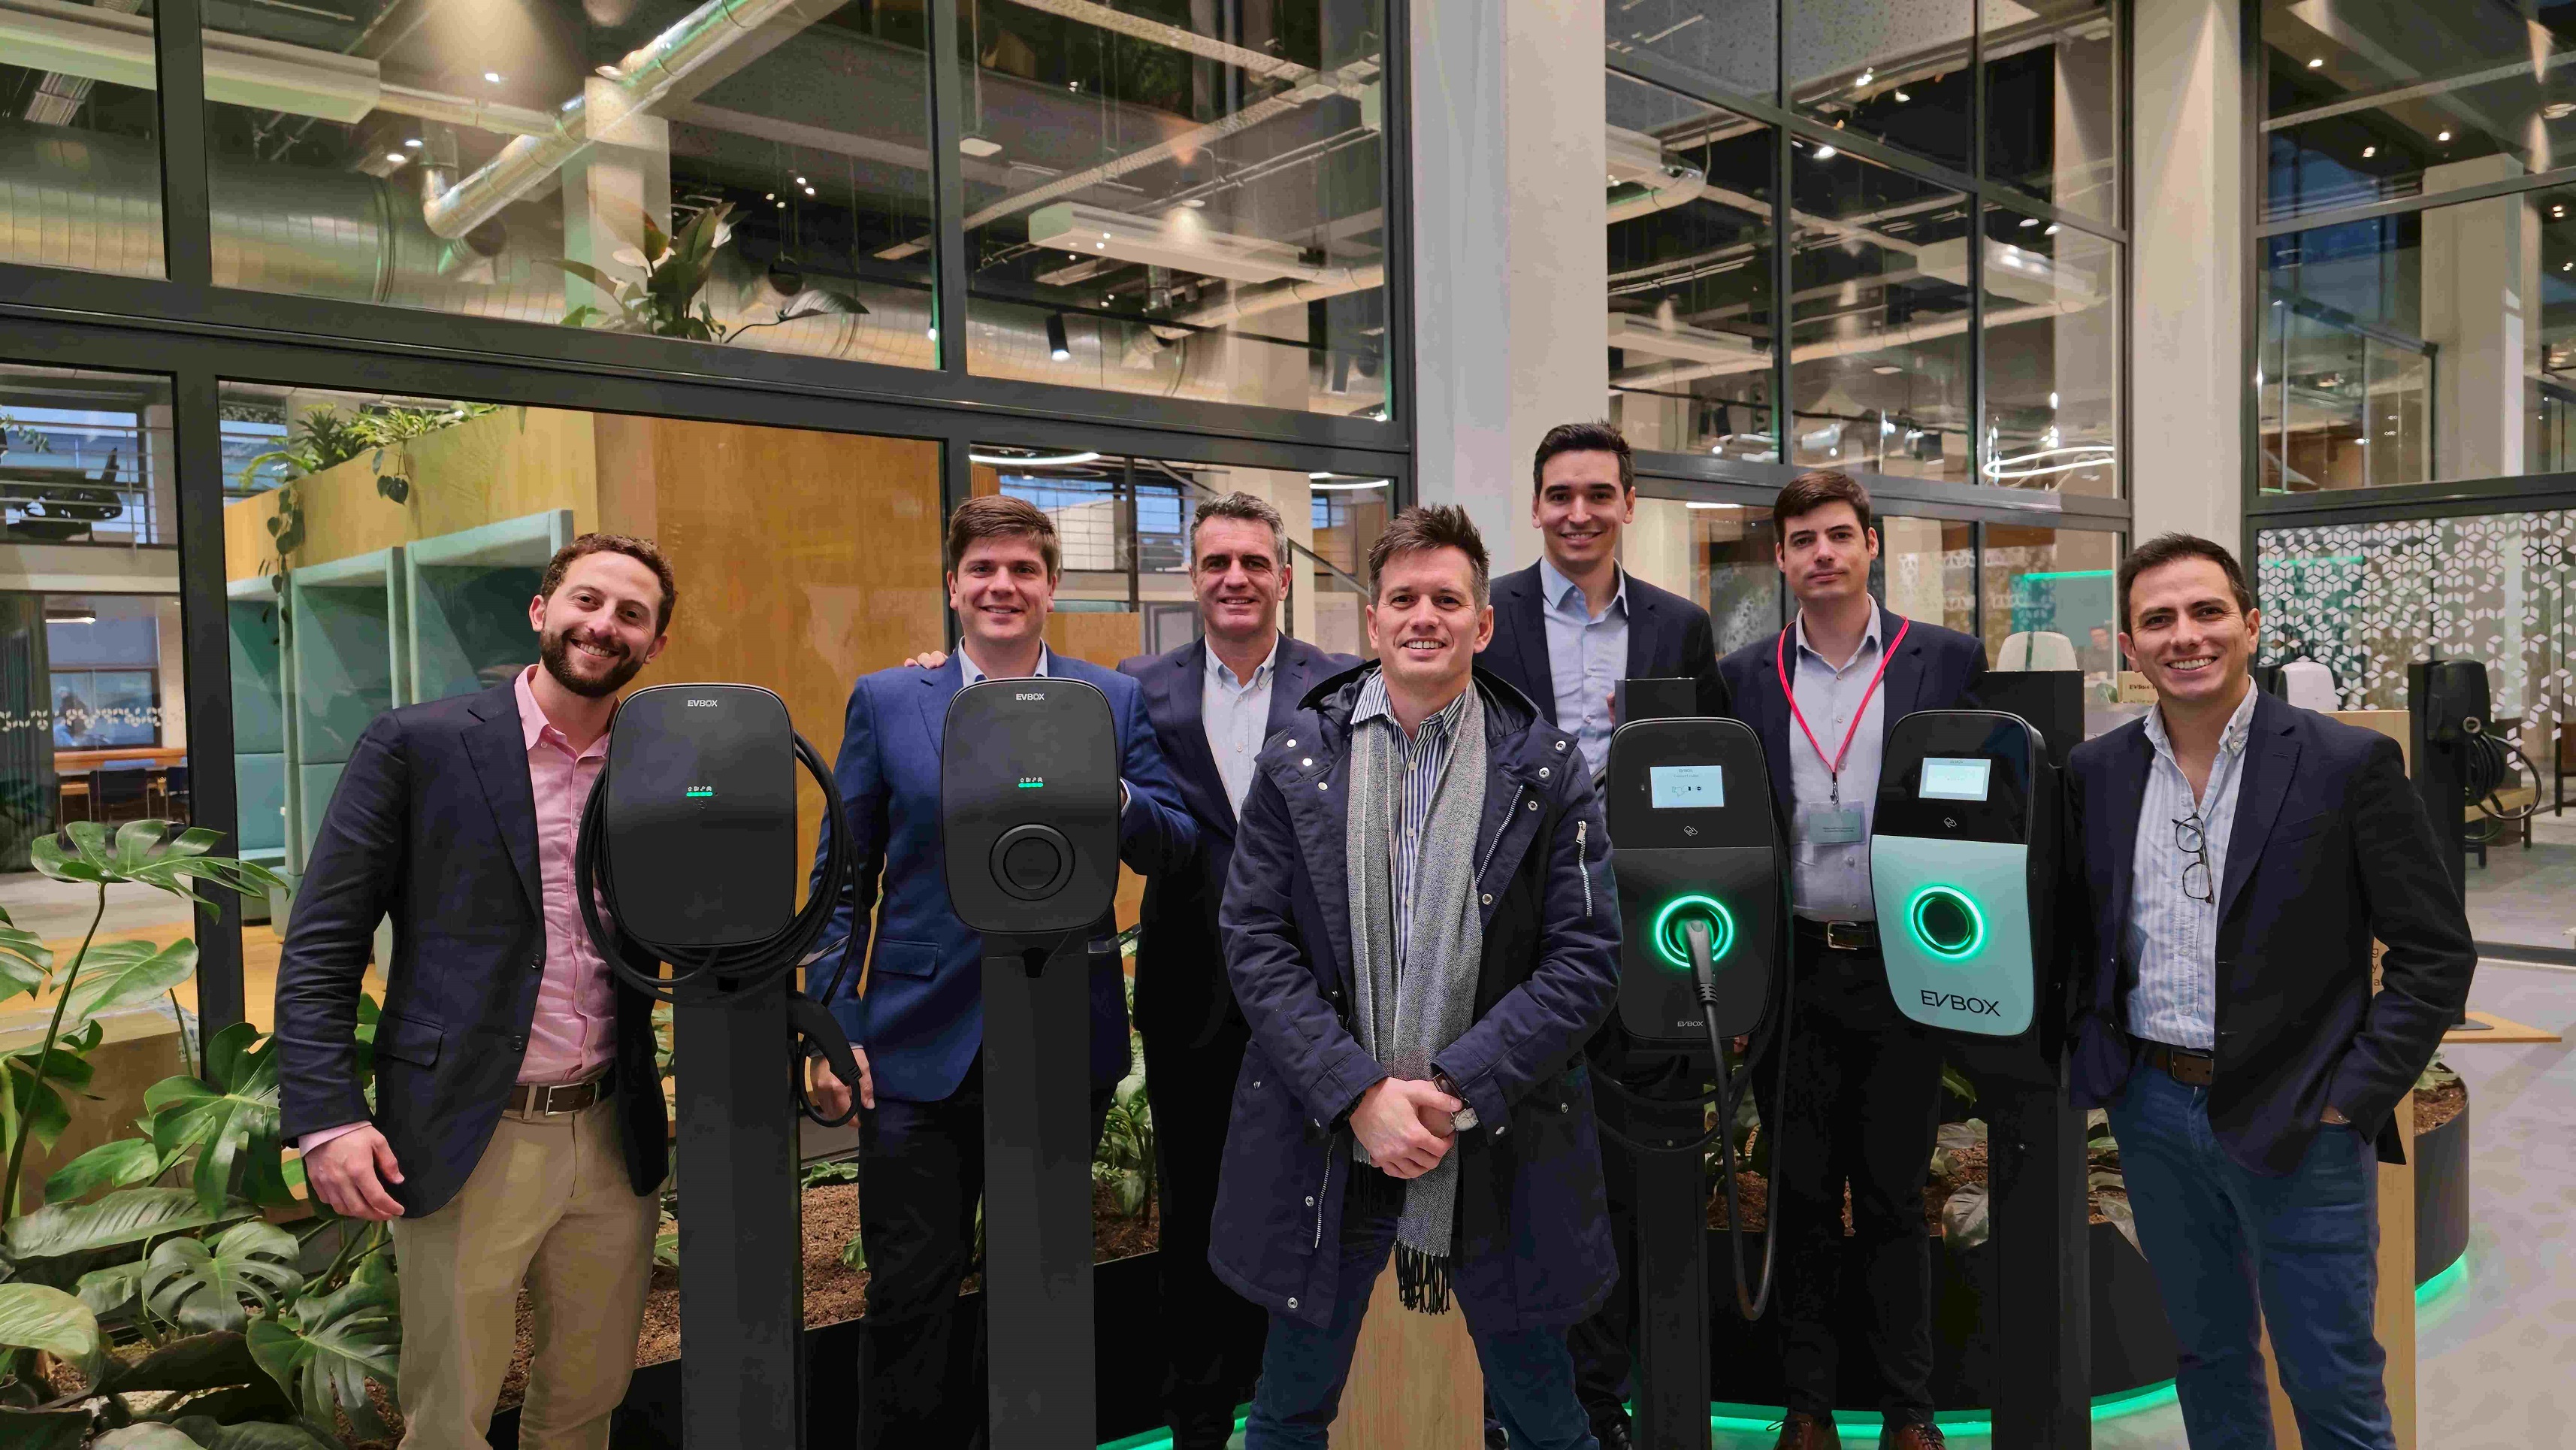 Eave has chosen EVBox charging solutions as part of 10,000 charging station rollout plan in Spain. Photo: EVBox